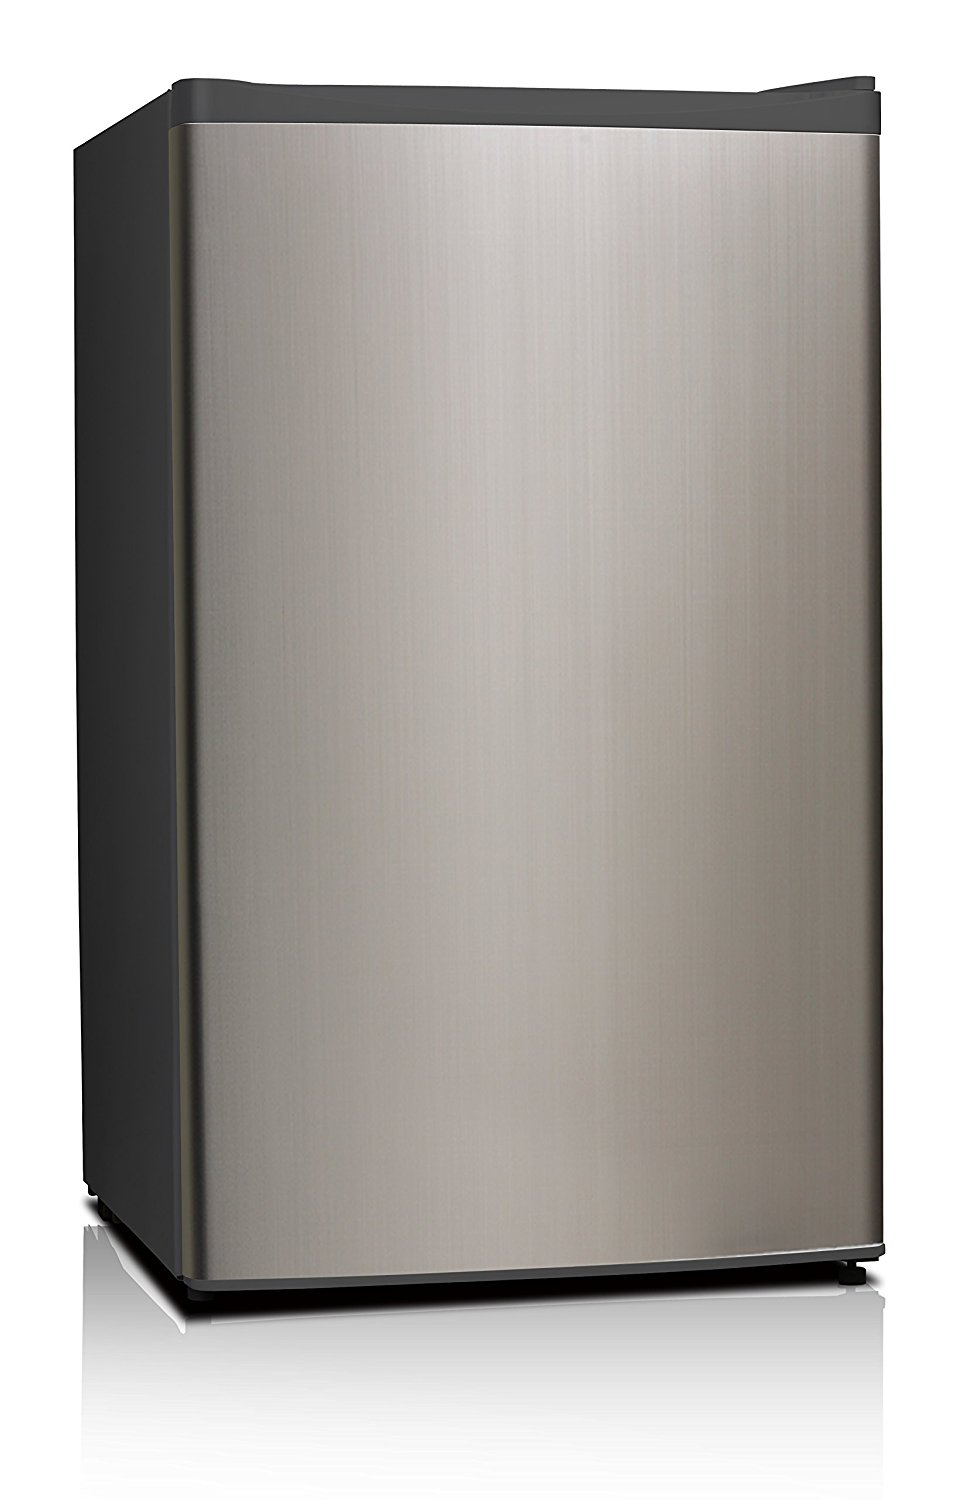 Midea WHS-121LSS1 Compact Single Reversible Door Refrigerator and Freezer, 3.3 Cubic Feet, Stainless Steel